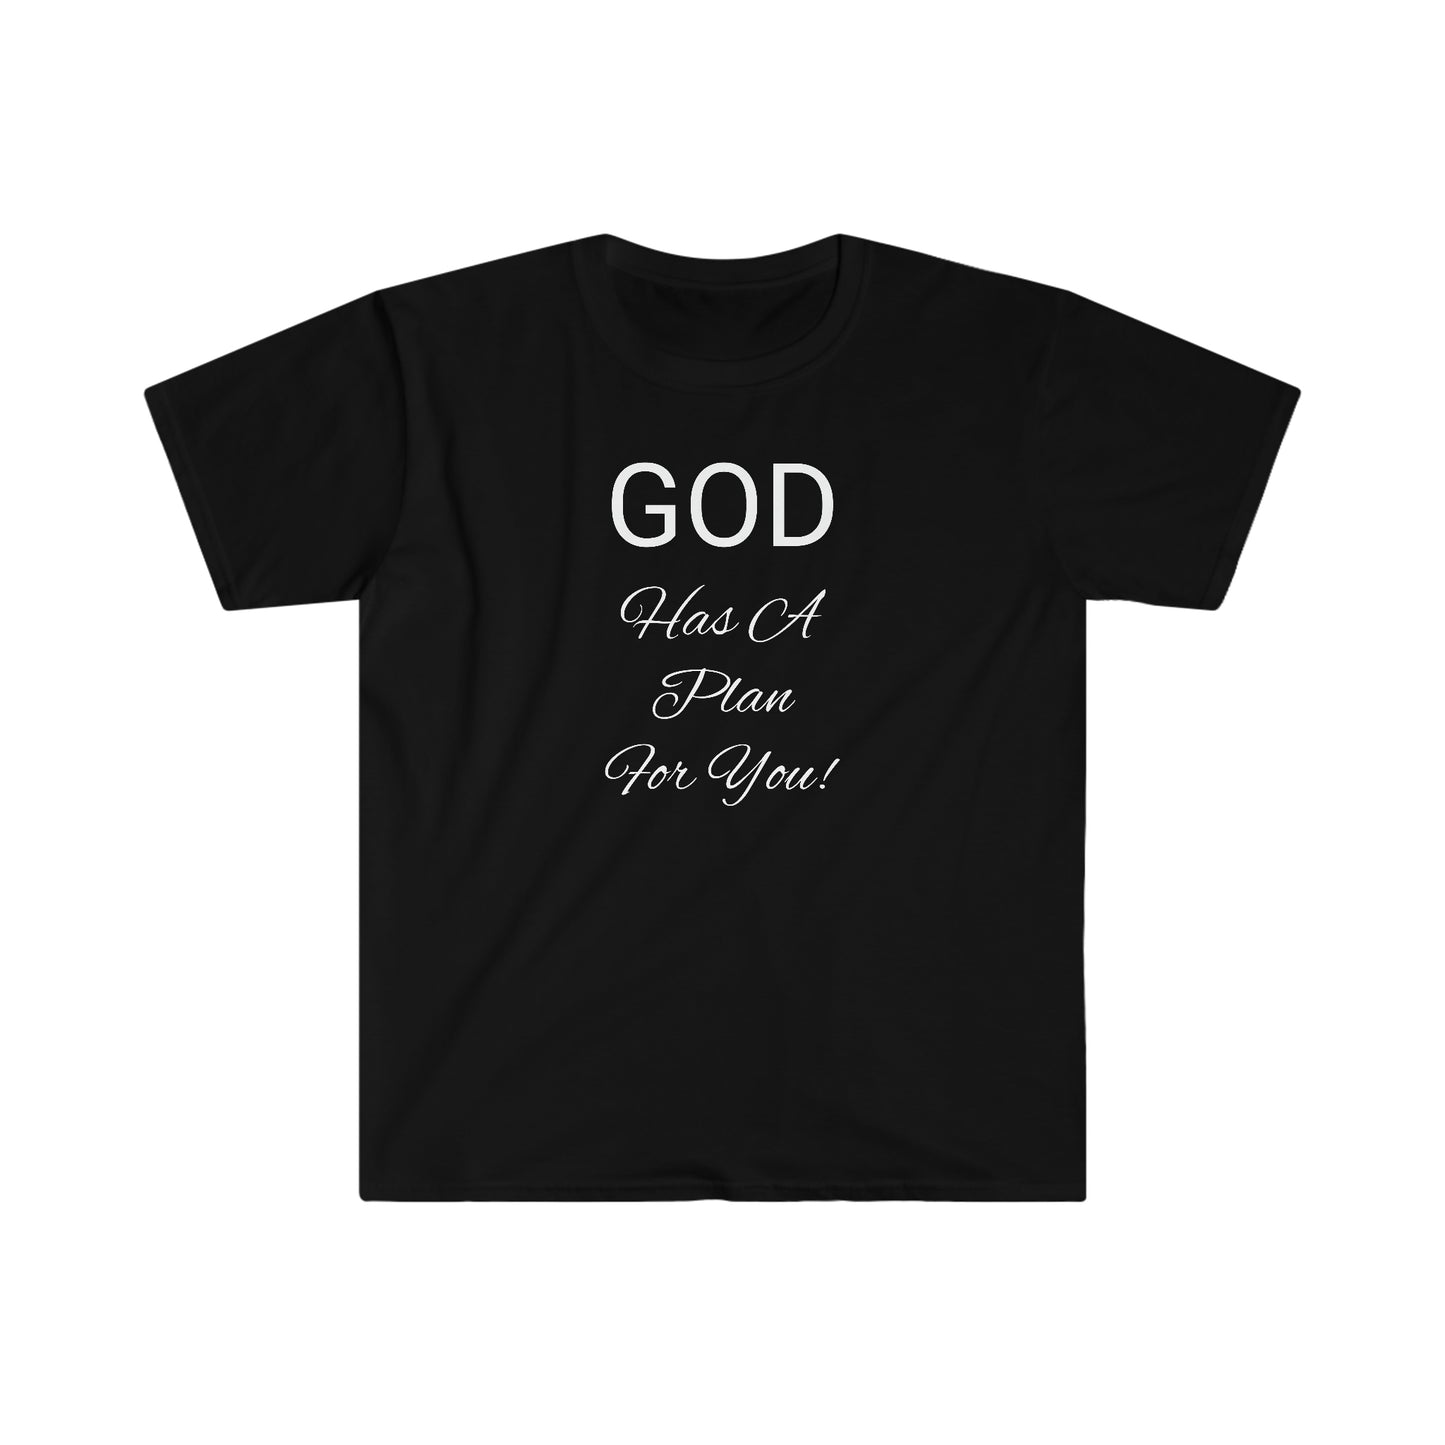 God Has A Plan For You! Unisex Softstyle T-Shirt